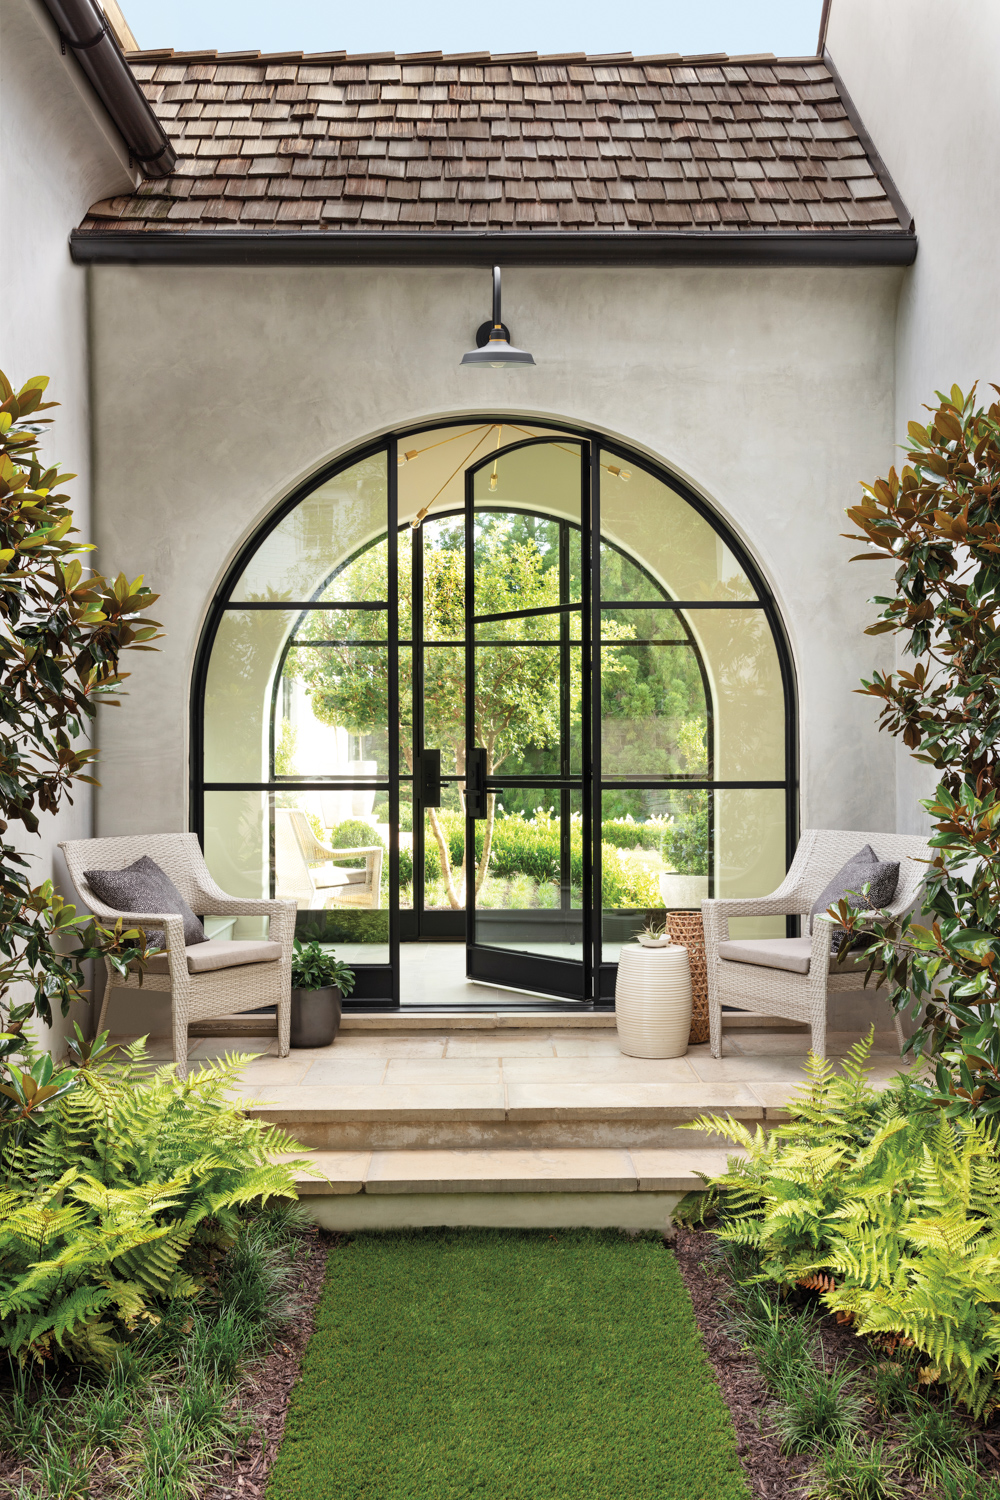 Stucco-coated entryway with arched French...